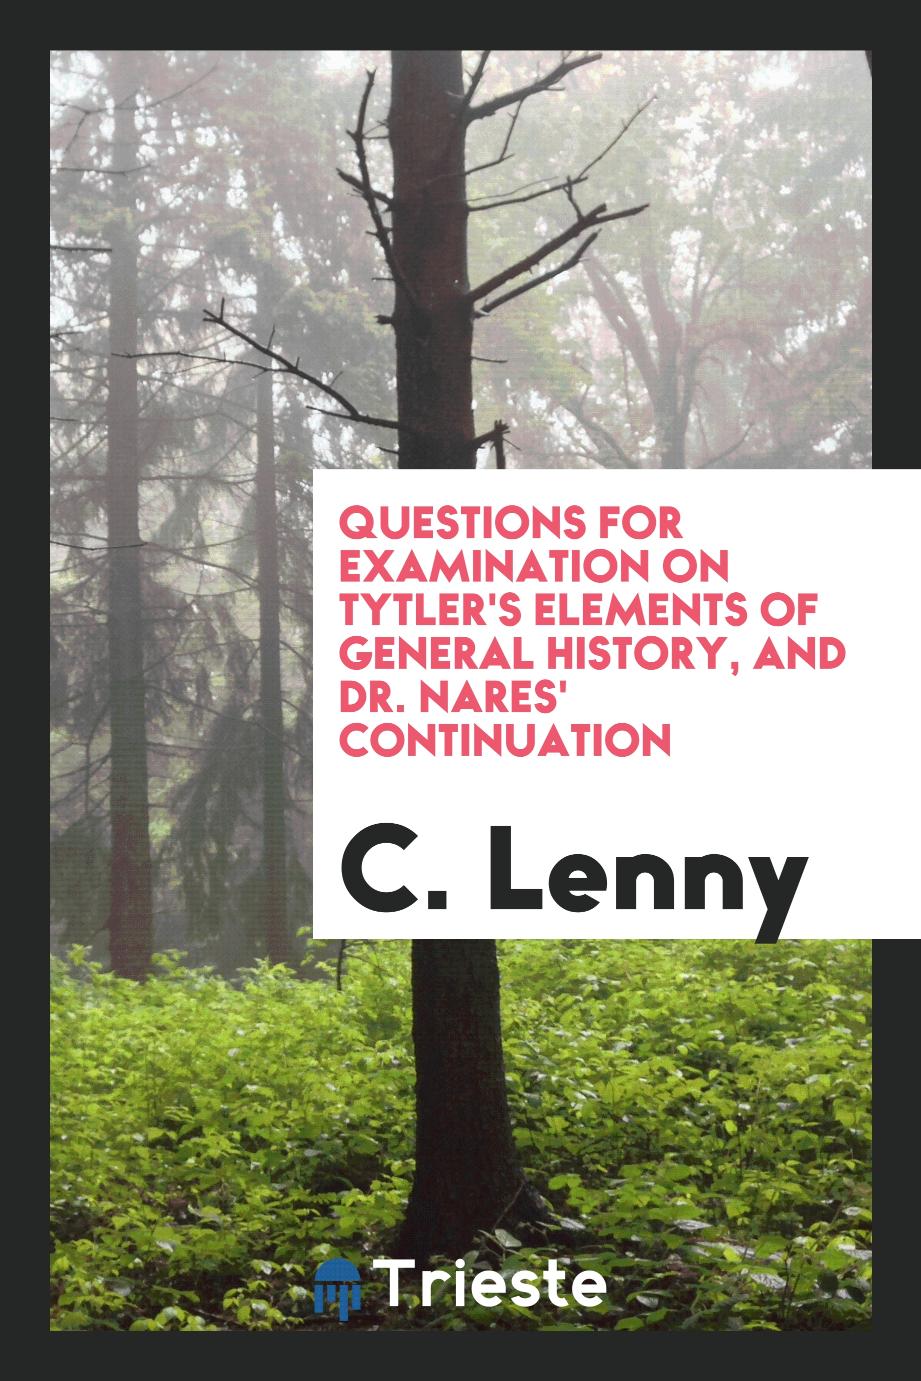 Questions for examination on Tytler's Elements of general history, and dr. Nares' continuation